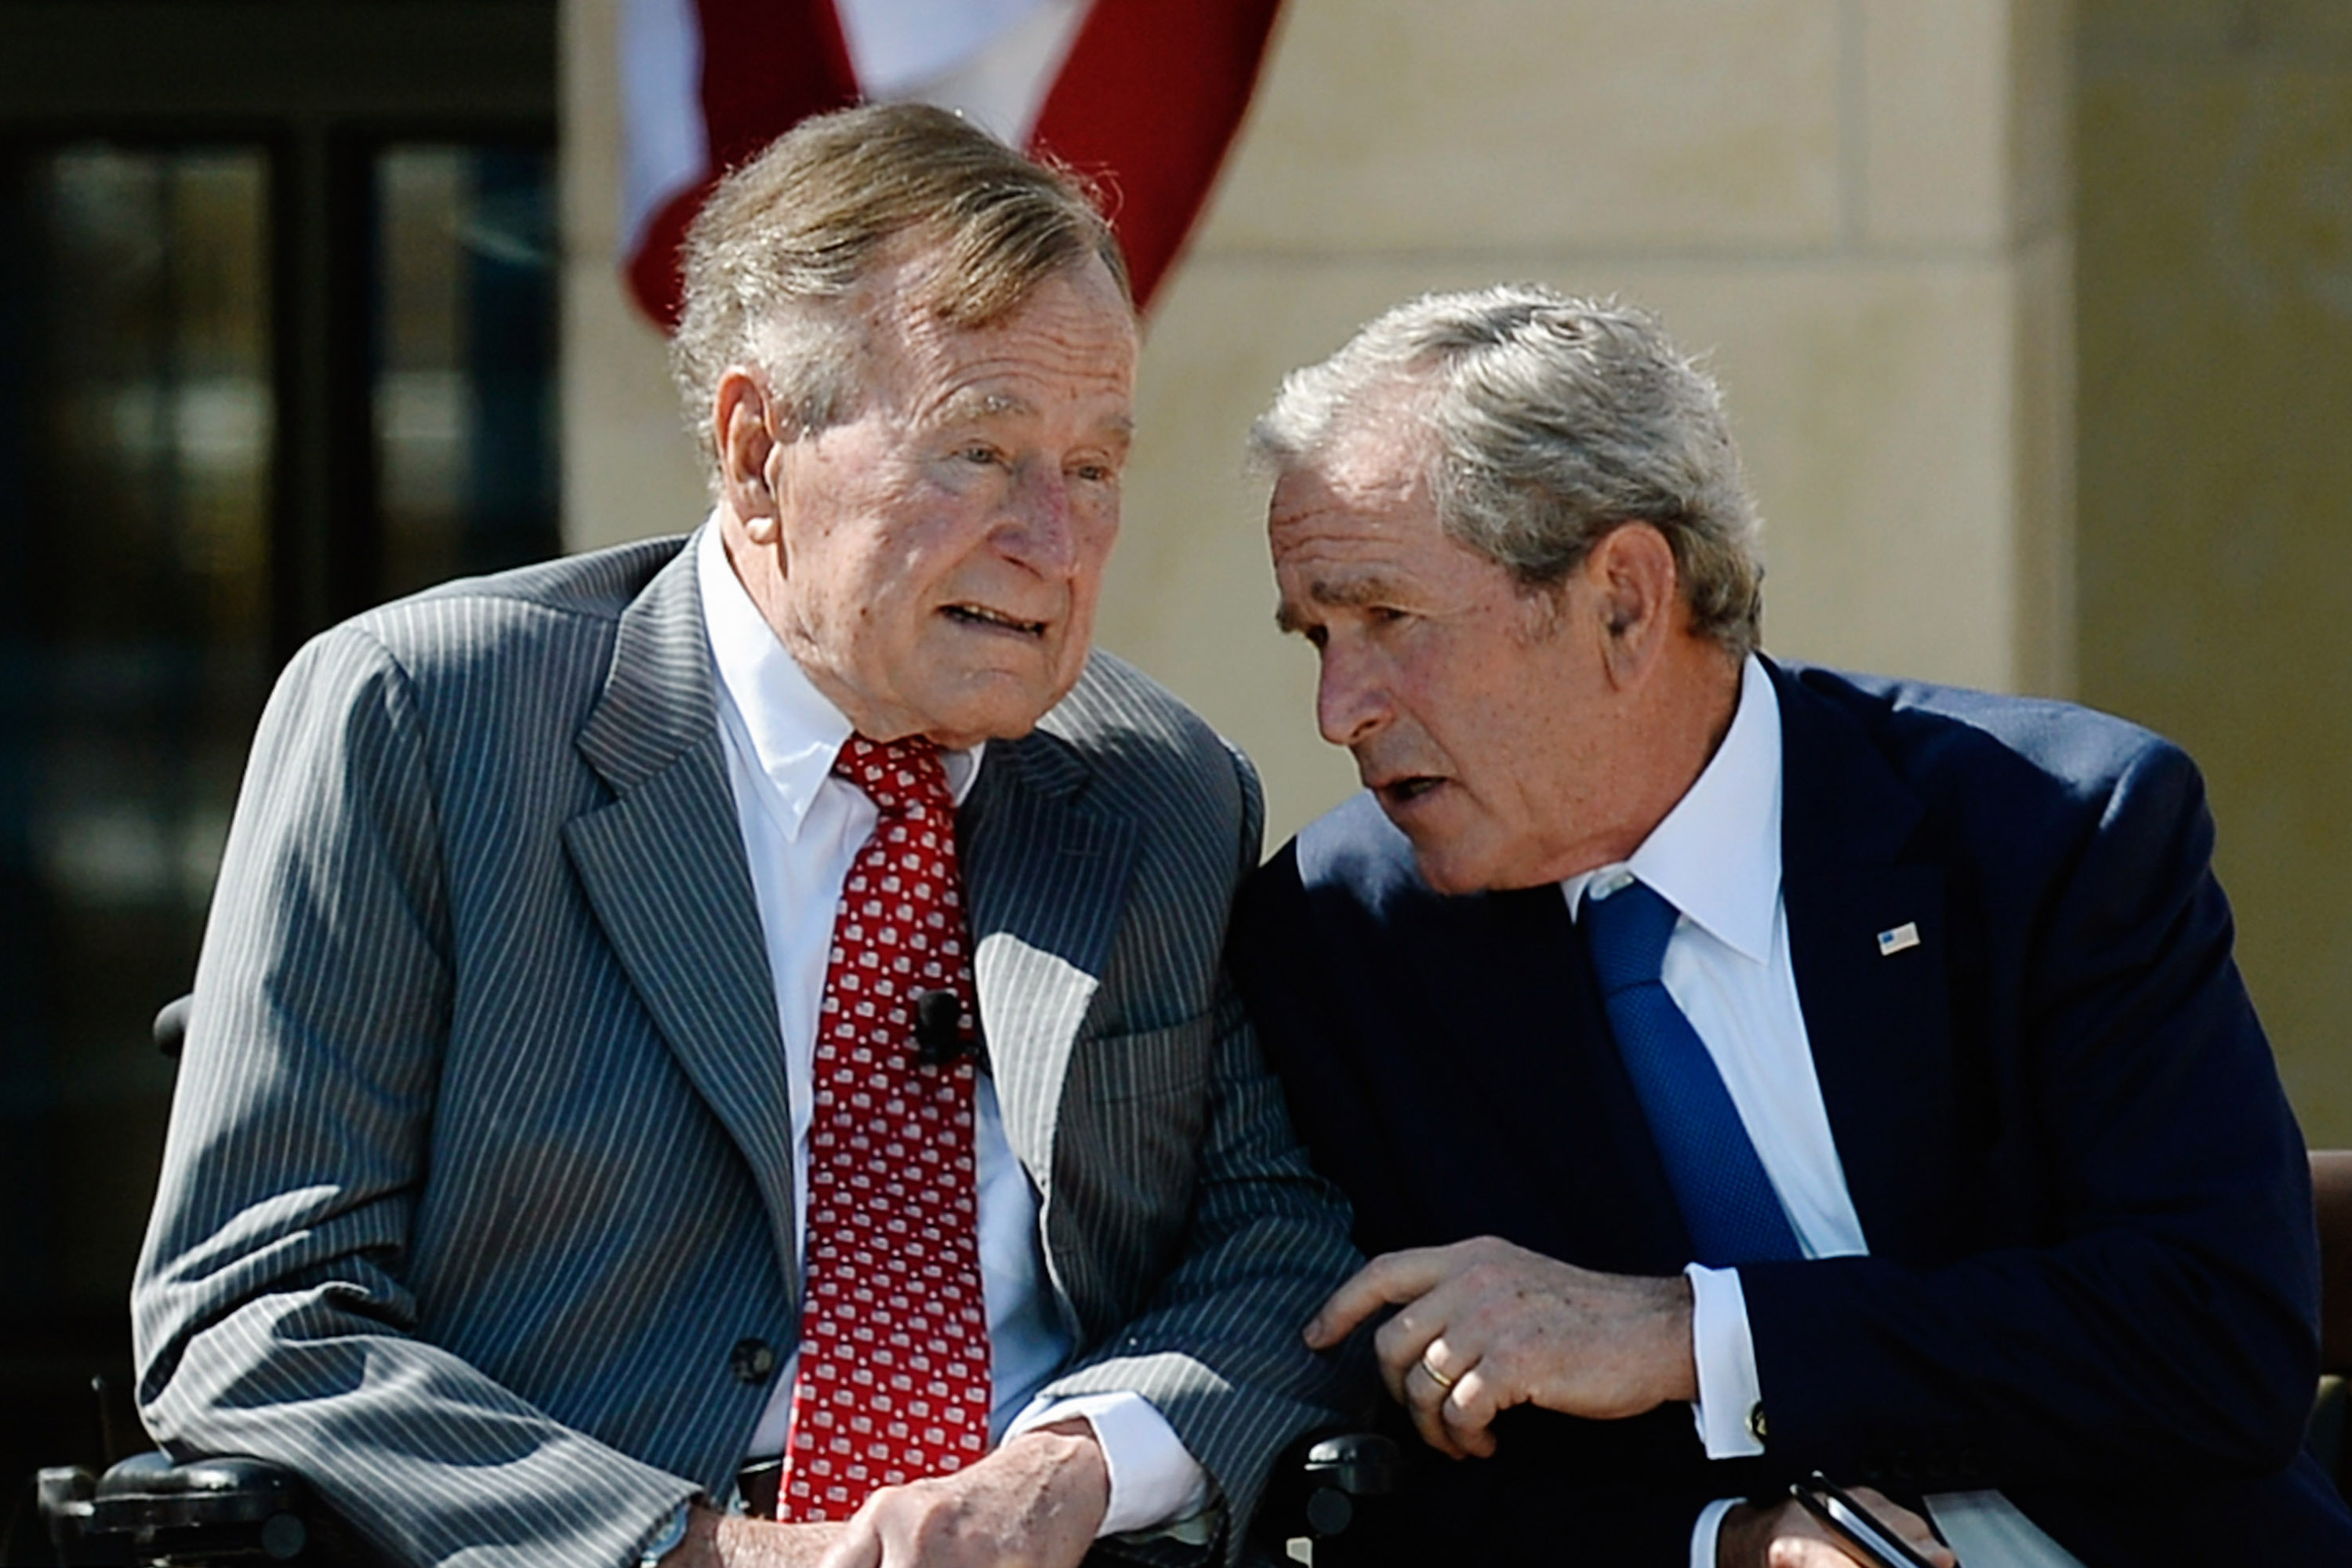 george-h-w-bush-and-george-w-bush-who-s-not-going-to-the-republican